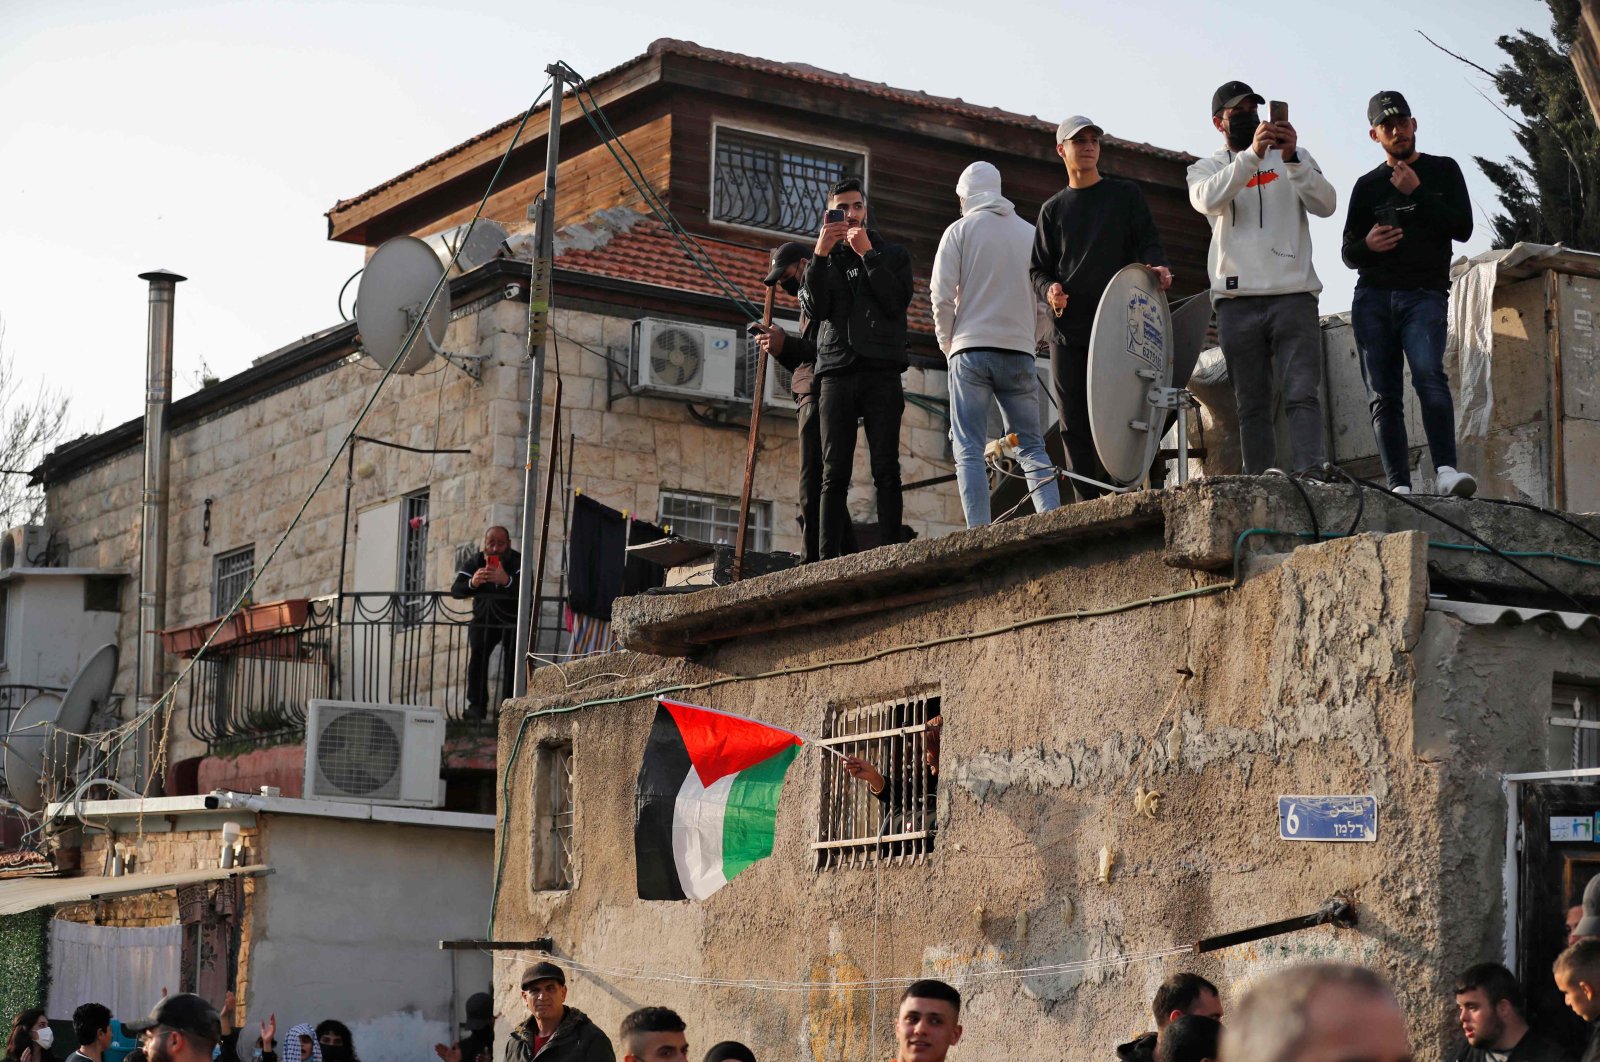 Palestinian demonstrators gather atop the roof of one of the houses facing eviction, while one waves a Palestinian flag from a window below, during a protest in the flashpoint neighbourhood of Sheikh Jarrah in Israeli-annexed east Jerusalem on February 18, 2022. - Hundreds of Palestinians face eviction by Israel from homes in Sheikh Jarrah and other east Jerusalem neighbourhoods. Circumstances surrounding the eviction threats vary. (Photo by Ahmad GHARABLI / AFP)